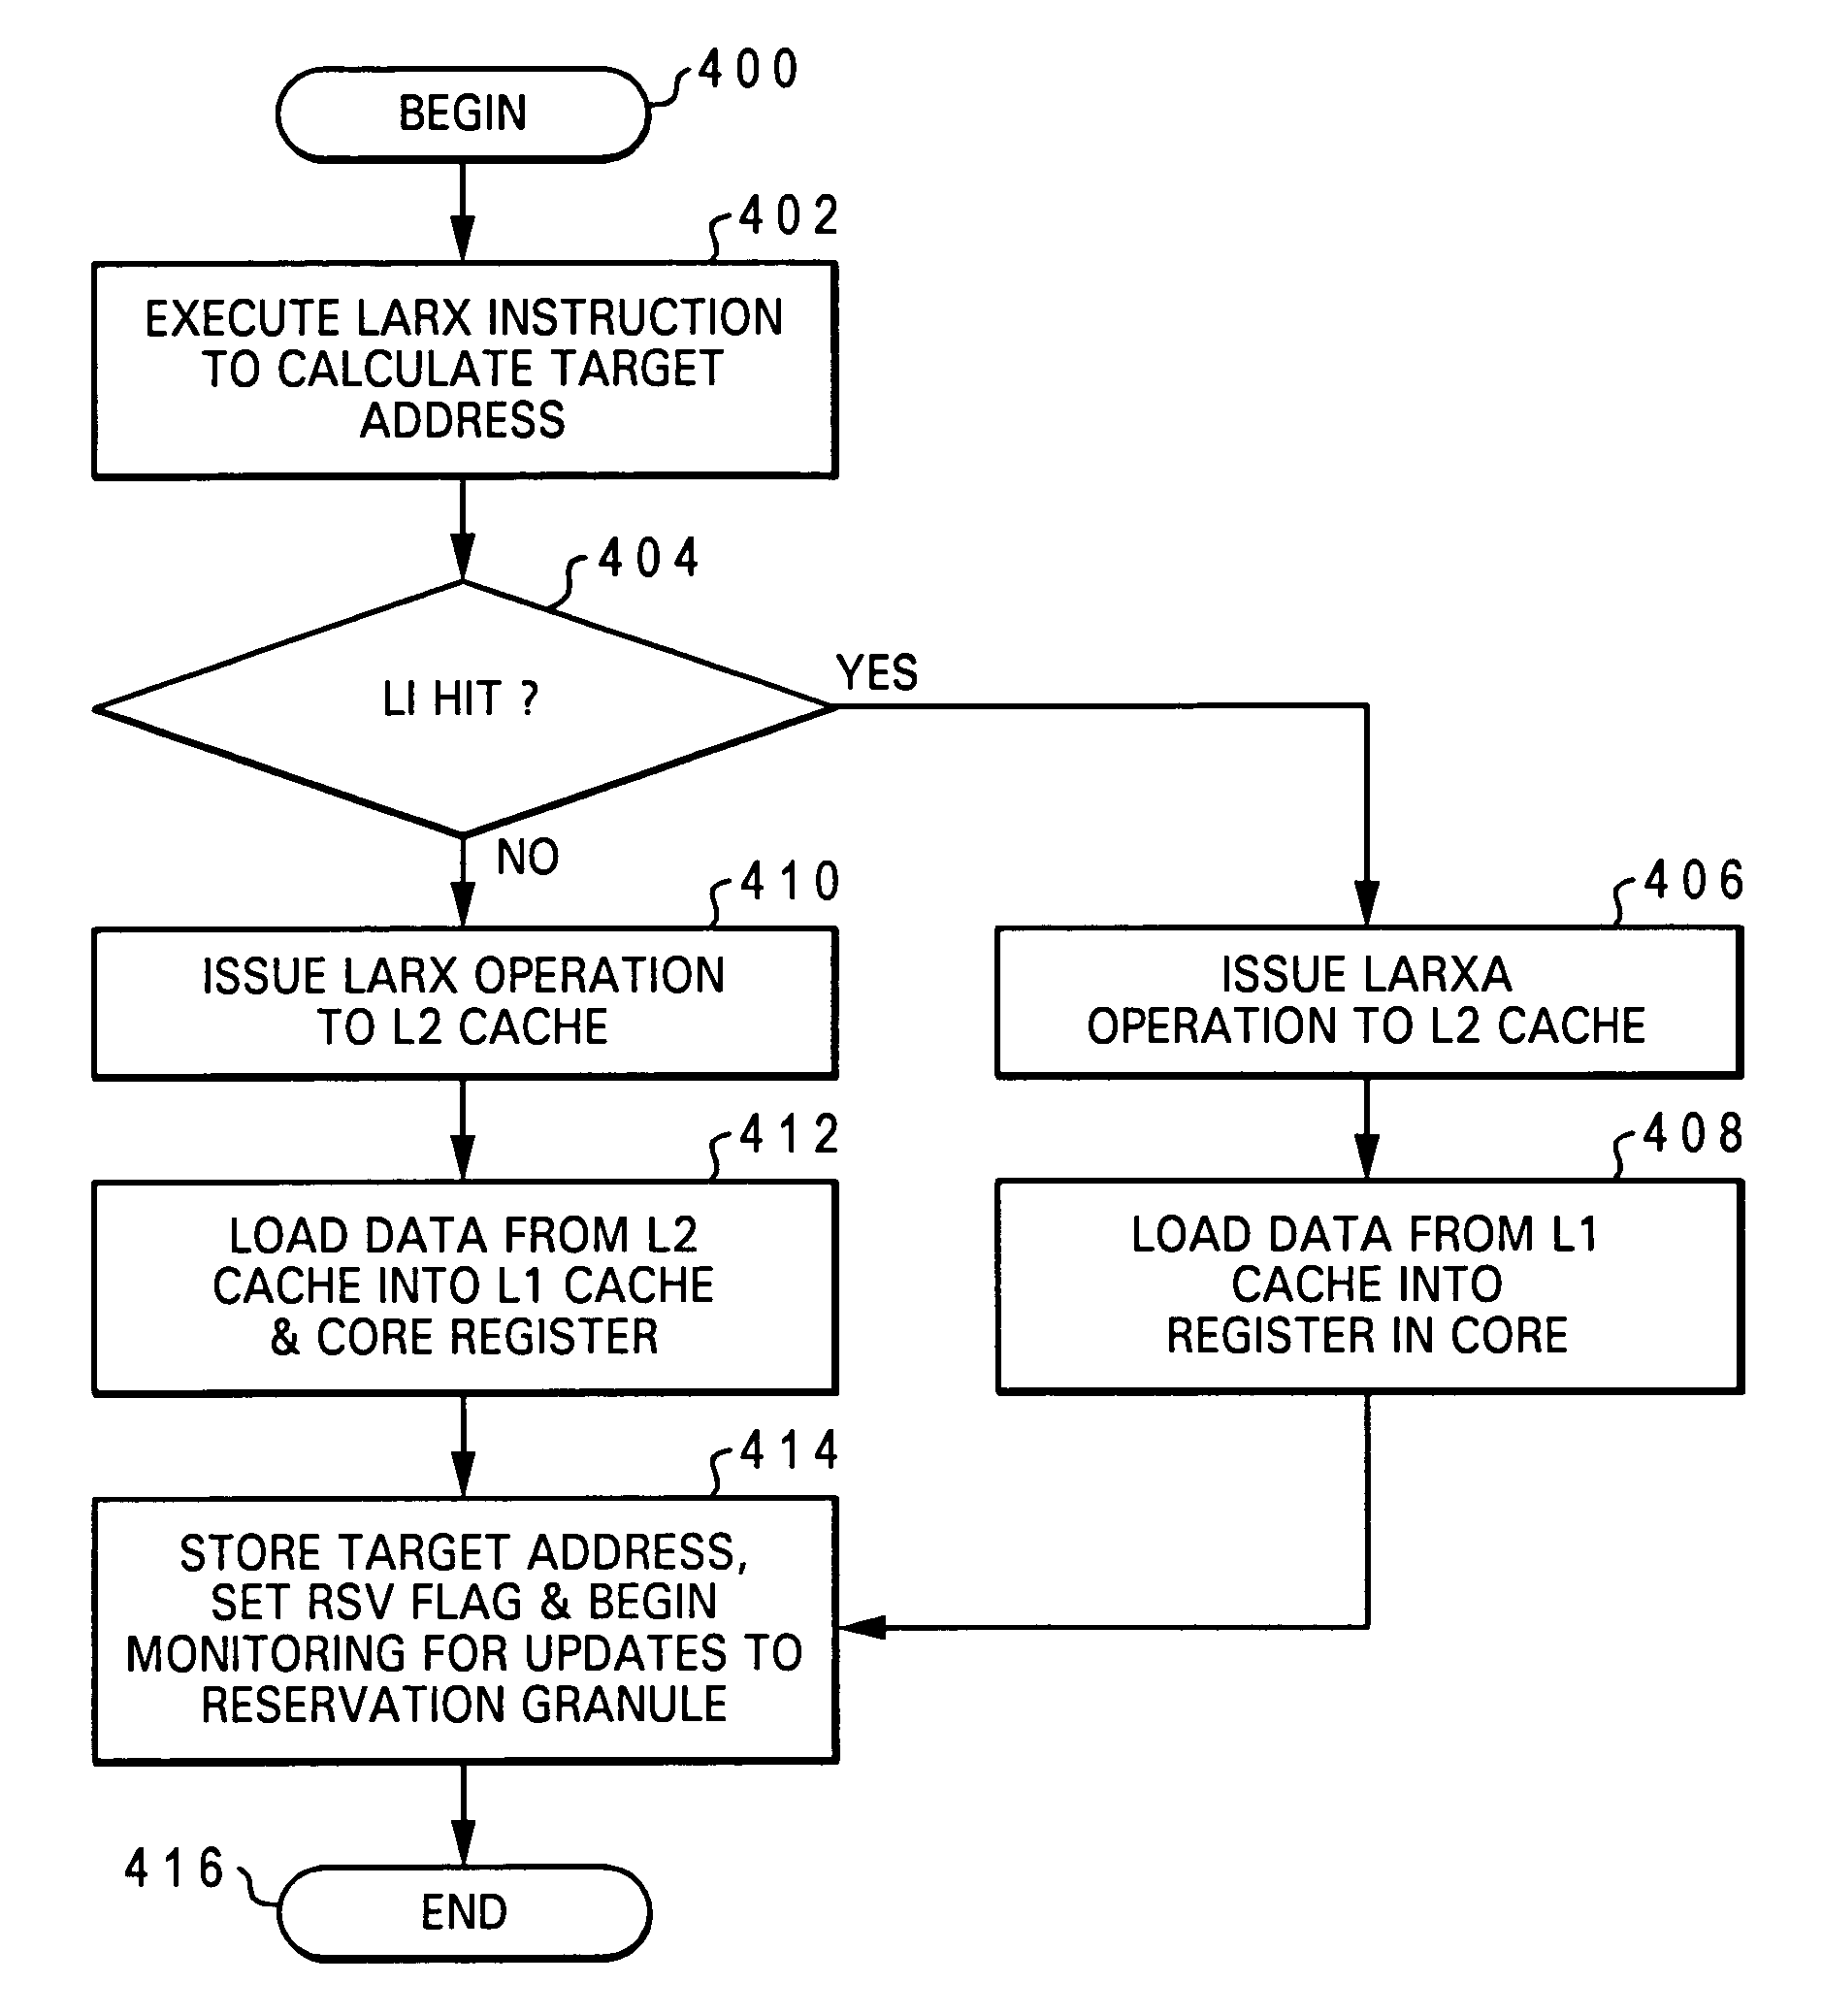 Processor, data processing system and method for synchronzing access to data in shared memory